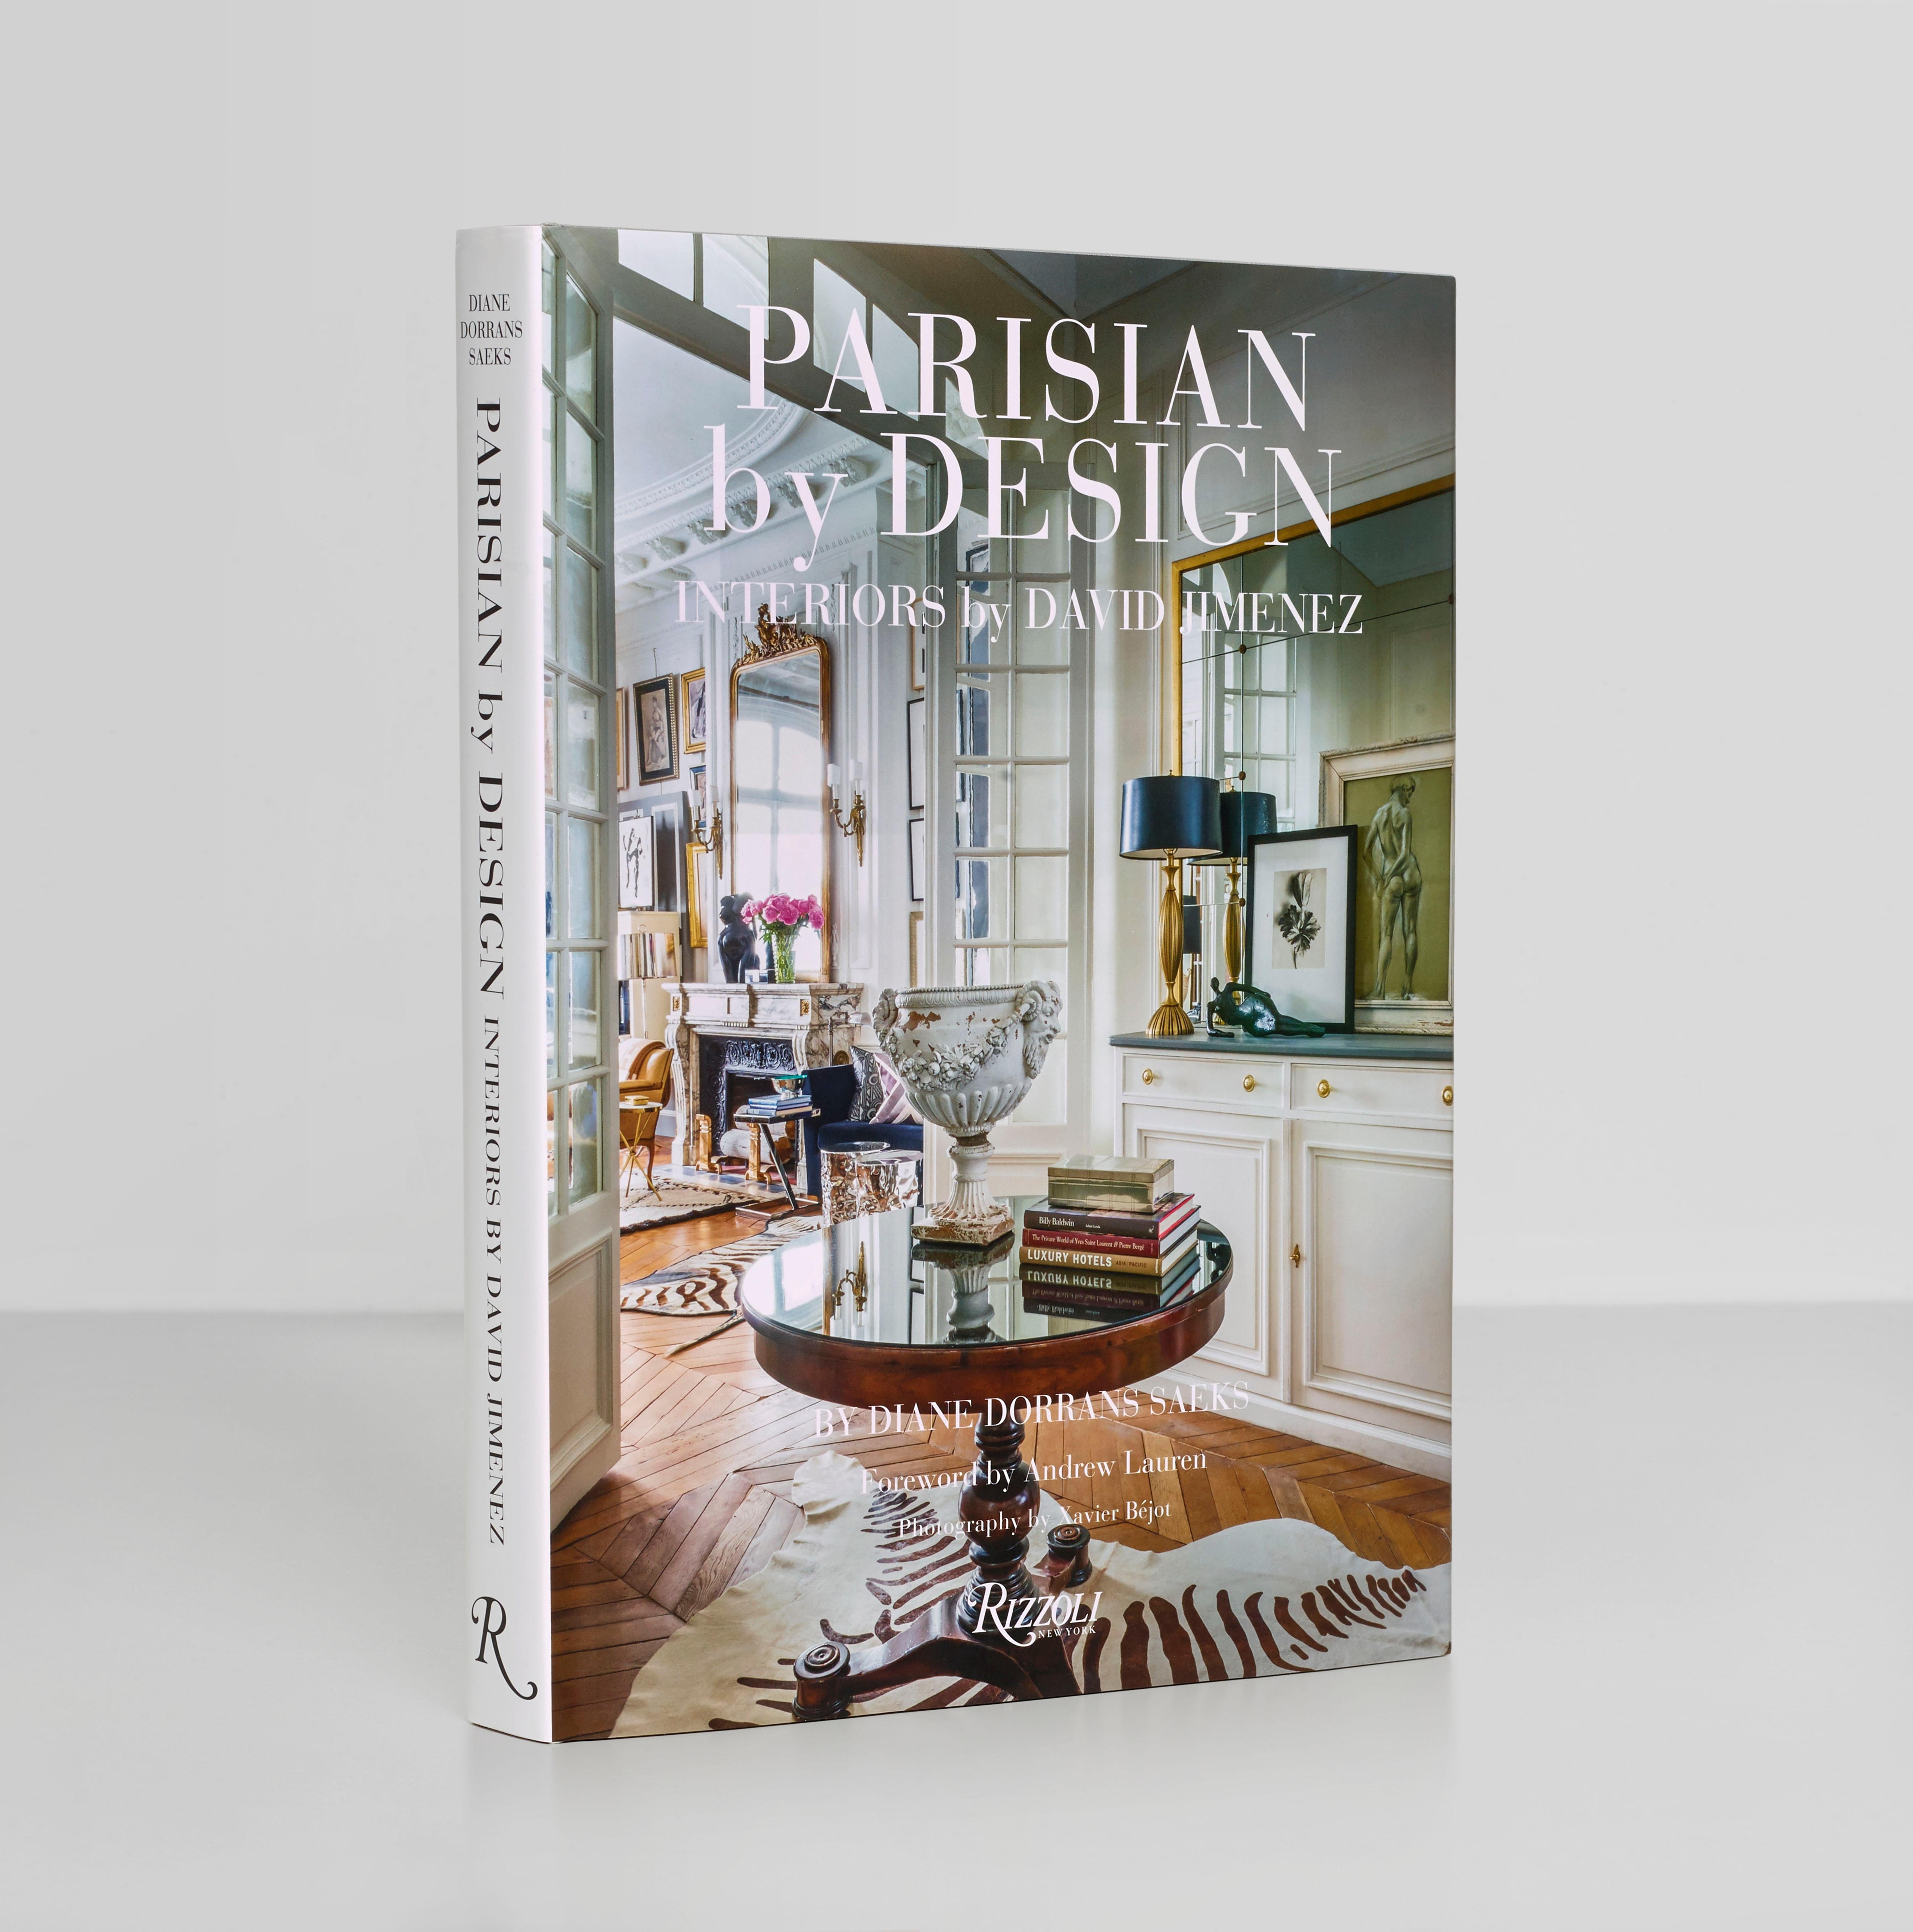 This book will publish 10/18/22. 

Parisian by Design: Interiors by David Jimenez
Author Diane Dorrans Saeks

A beautiful apartment in Paris is something we all dream of. A bohemian retreat, full of character and charm. Here, designer David